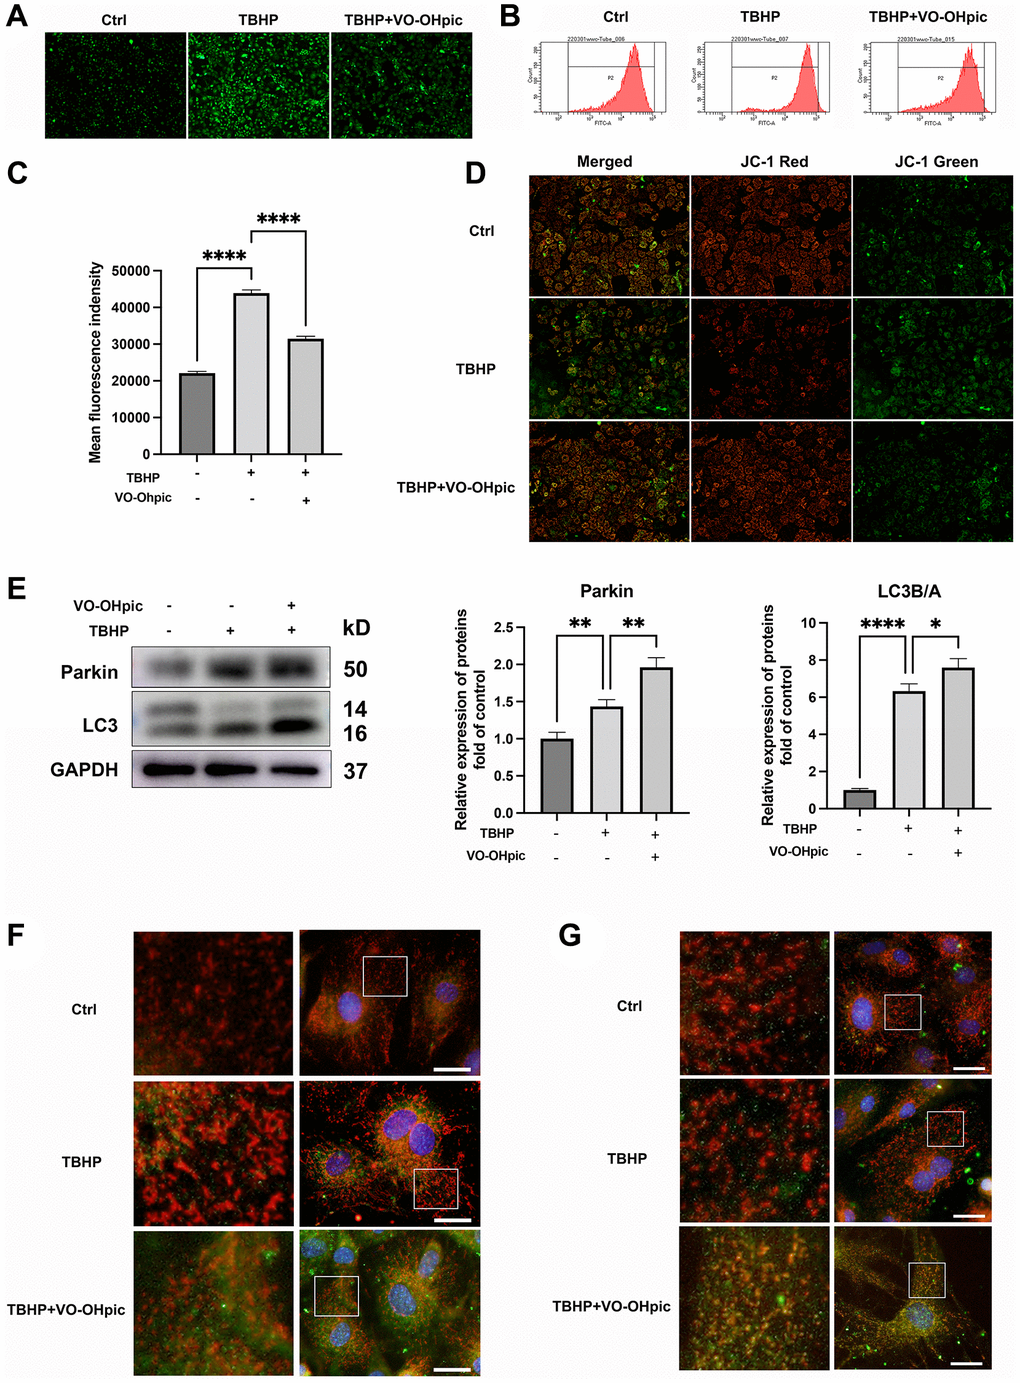 VO-OHpic treatment promoted mitophagy in CEP chondrocytes. (A) CEP chondrocytes were treated with TBHP (100 μM) and VO-OHpic (1 μM) for 24 h, representative fluorescence microscopy photomicrographs of intracellular ROS in chondrocytes. (B) ROS was detected by flow cytometric analysis after labeling with DCFH-DA. (C) The bar graphs show the mean fluorescence intensity of ROS levels in endplate chondrocytes. (D) Representative fluorescence microscopy photomicrographs of mitochondrial membrane potential (MMP) after incubating with JC-1. Red fluorescence was emitted by JC-1 aggregates in healthy mitochondria with polarized inner mitochondrial membranes, whereas green fluorescence was emitted by cytosolic JC-1 monomers, indicating MMP collapse. (E) CEP chondrocytes were pretreated with VO-OHpic (1 μM) for 18 hours, then 100 μM TBHP was added for 6 hours, western blot was conducted to examine the protein levels of parkin and LC3. The band density of parkin and LC3 was quantified and normalized to control. (F, G) Immunofluorescence staining was conducted to examine the expression and localization of LC3B, parkin (green) and mitochondria (red). Scale bar = 25 μm. Data are presented as mean ± SD from three independent experiments. *P **P ****P 